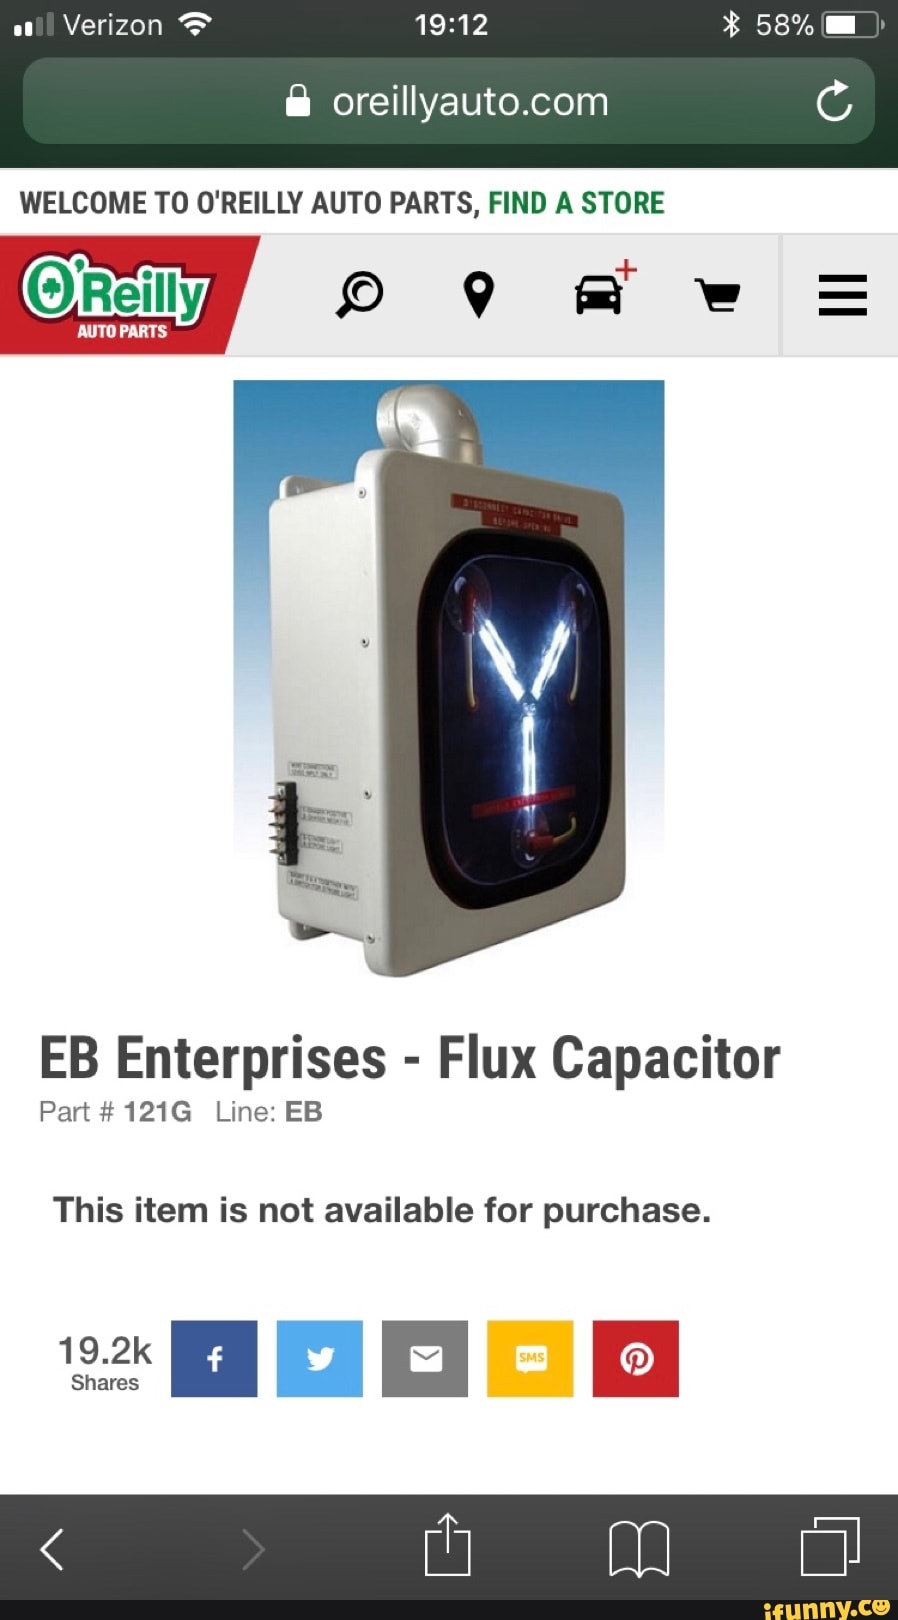 E Oreillyauto Com Welcome T0 O Reilly Auto Parts Find A Store Eb Enterprises Flux Capacitor Part 121g Line Eb This Item Is Not Available For Purchase